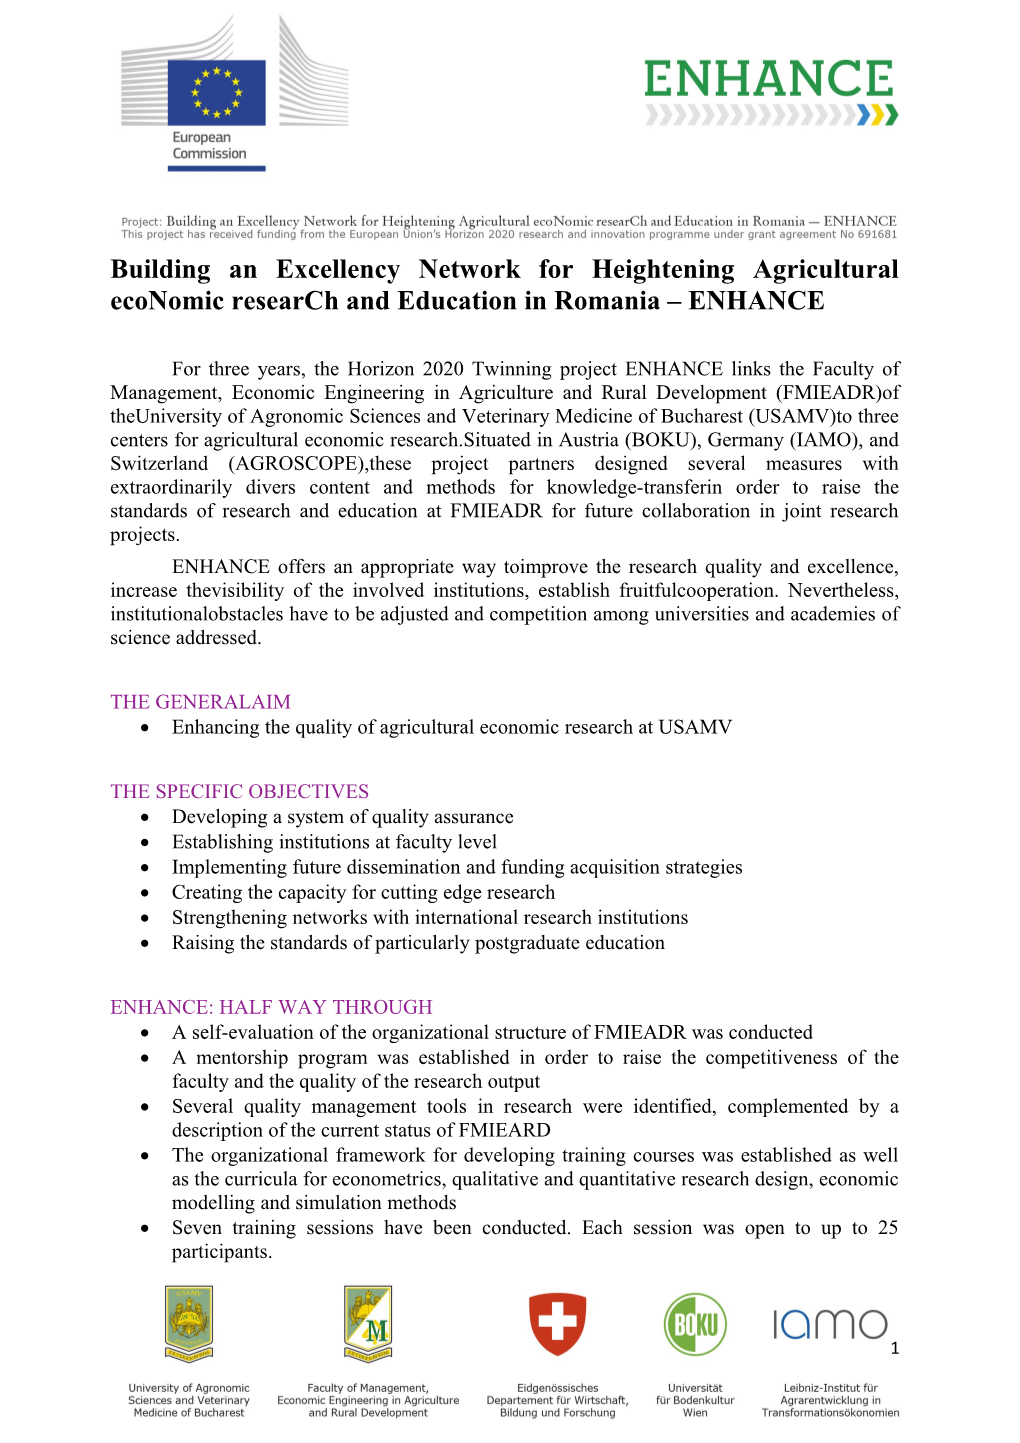 Building an Excellency Network for Heightening Agricultural Economic Research and Education